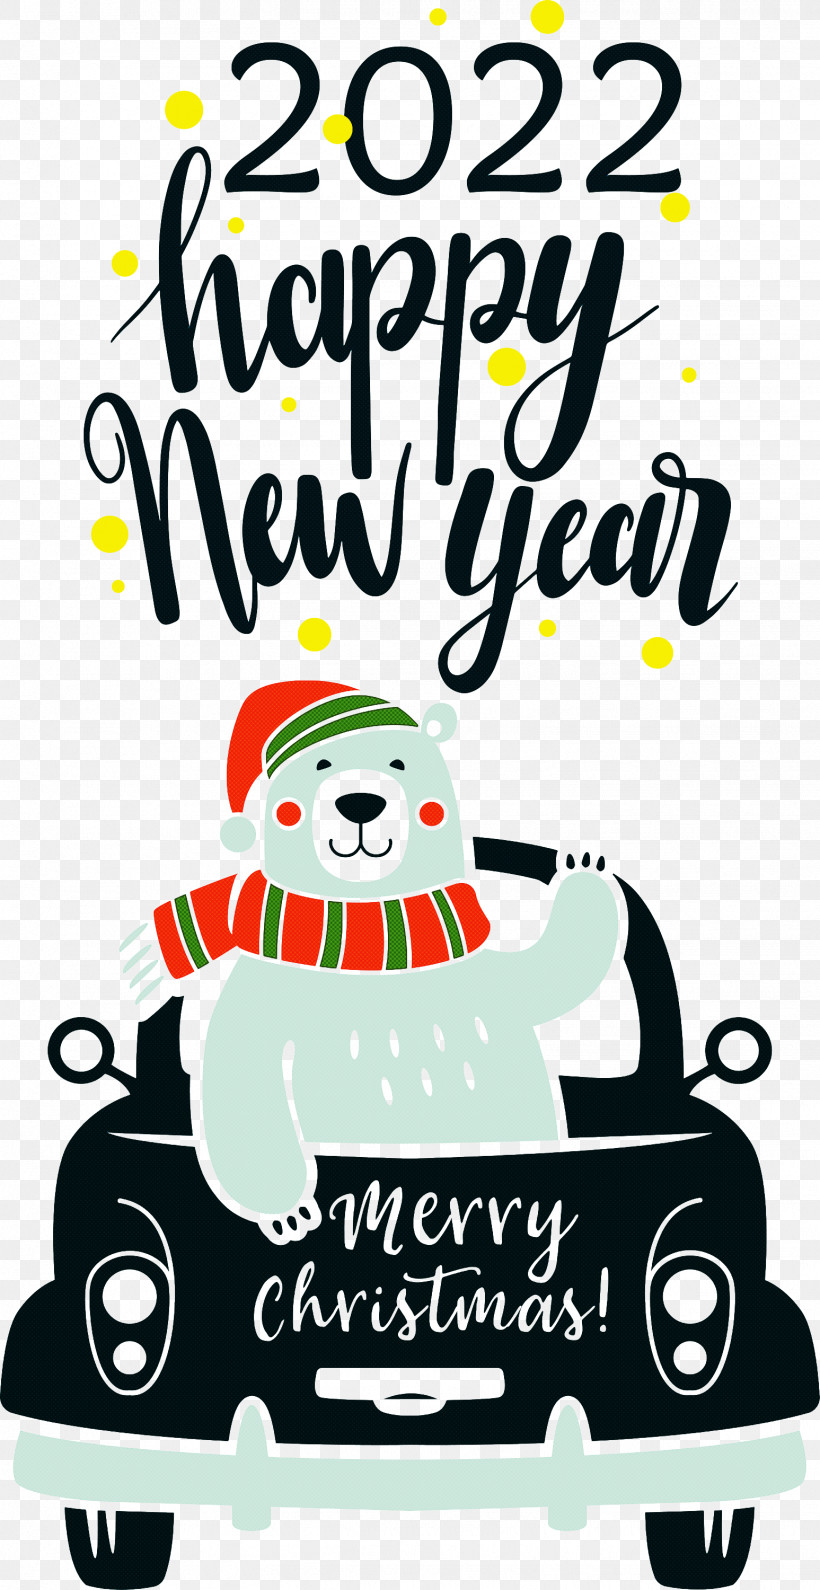 2022 Happy New Year 2022 New Year Happy 2022 New Year, PNG, 1547x3000px, Christmas Day, Line Art, New Year, New Years Day, New Years Eve Download Free